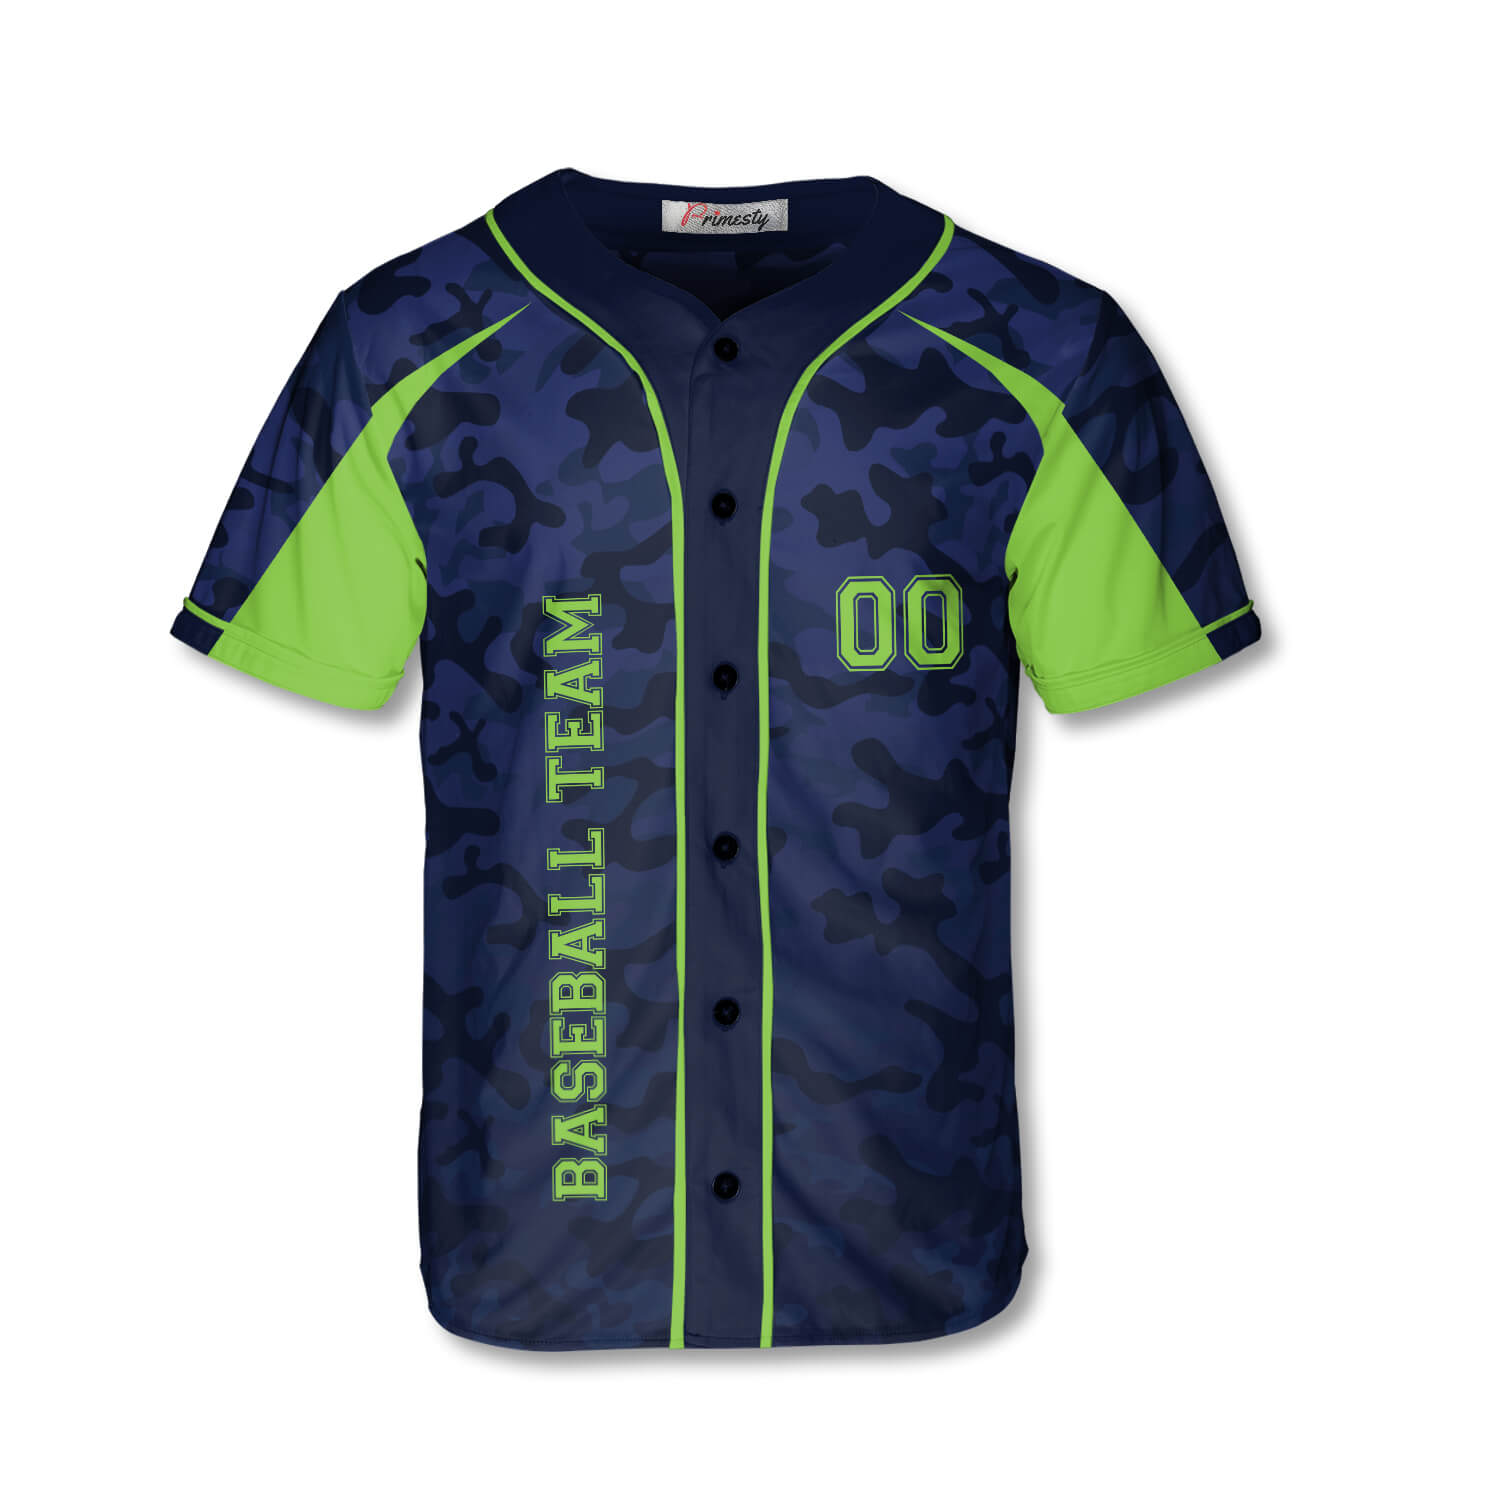 Green Neon Camo Custom Baseball Jersey for Toddlers and Youth - Primesty